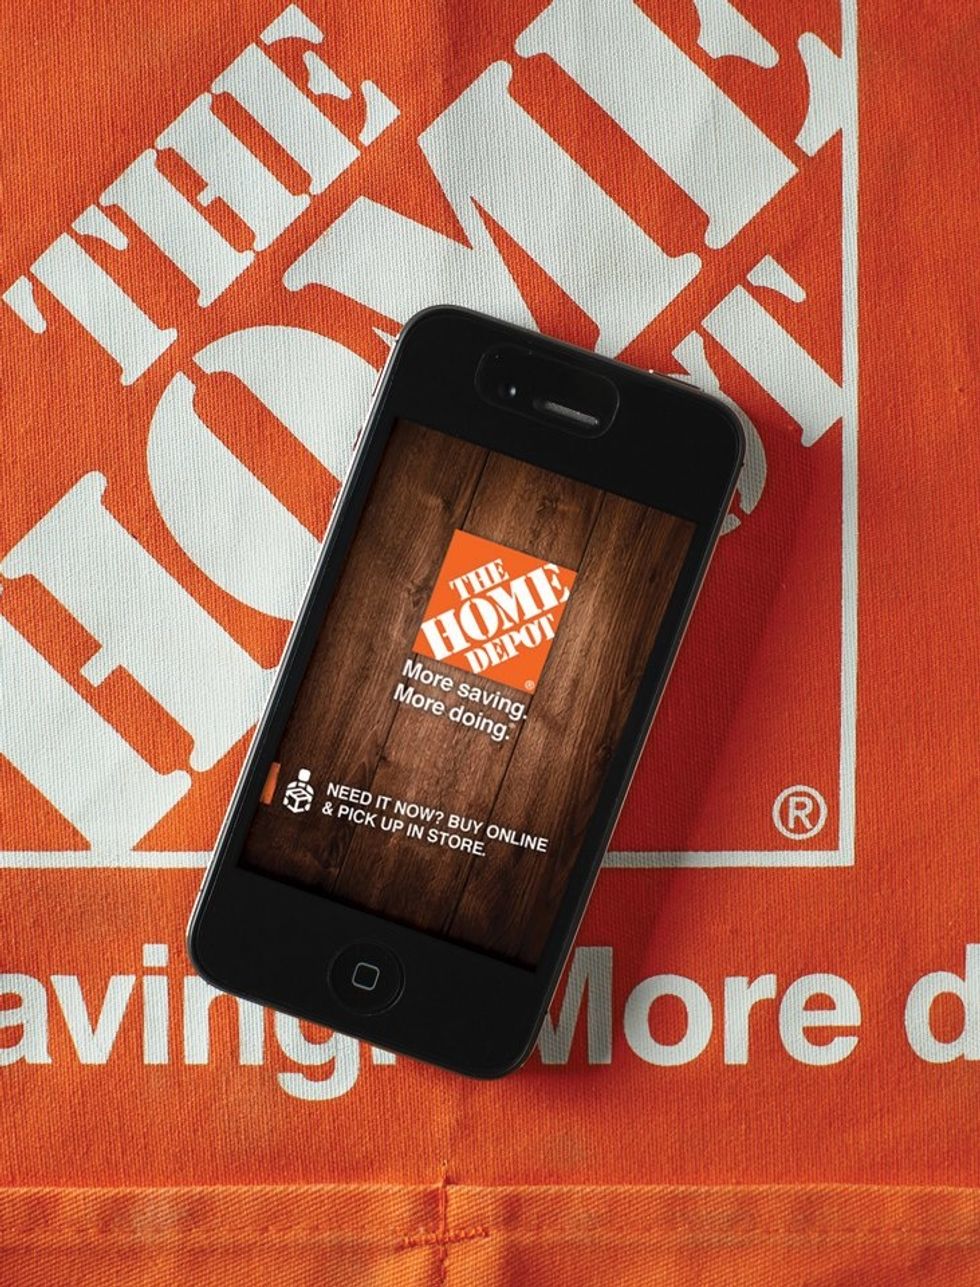 A photo of The Home Depot logo, and a smartphone showing online sales at the store, where you can \u200bbuy smart appliances, lighting and home security devices 